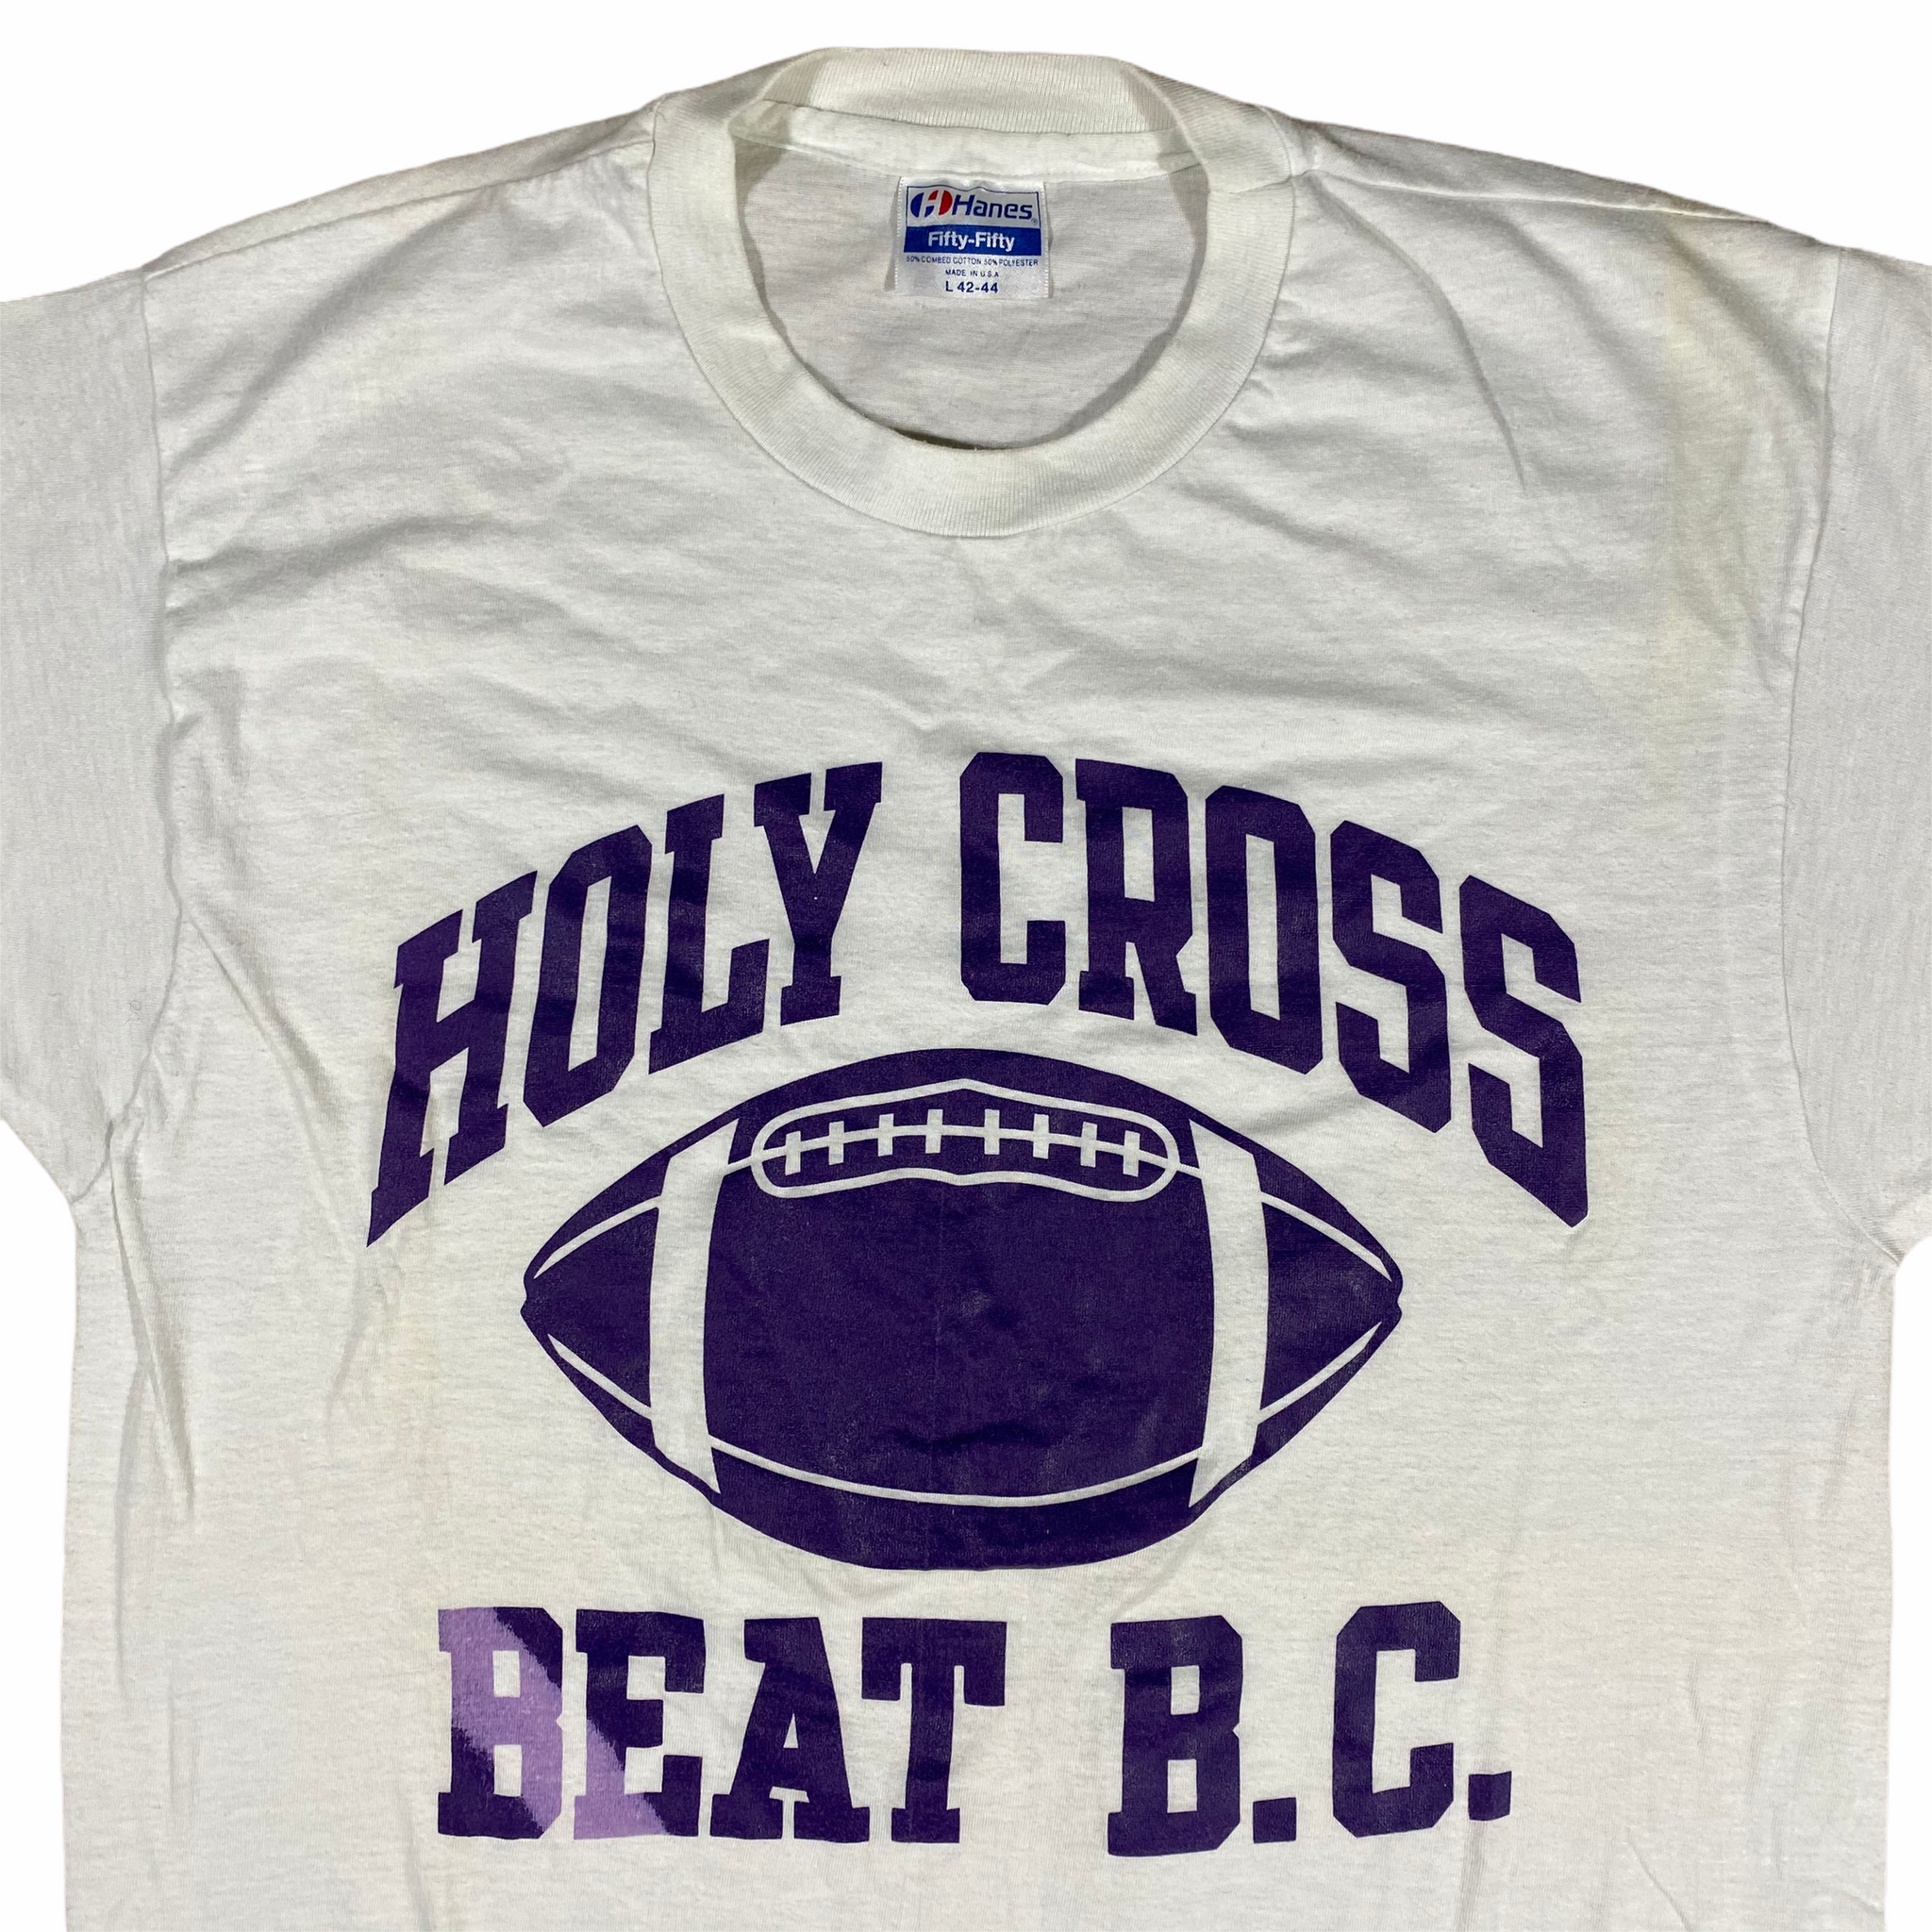 80s Holy cross/ beat boston college tee. Great condition M/L